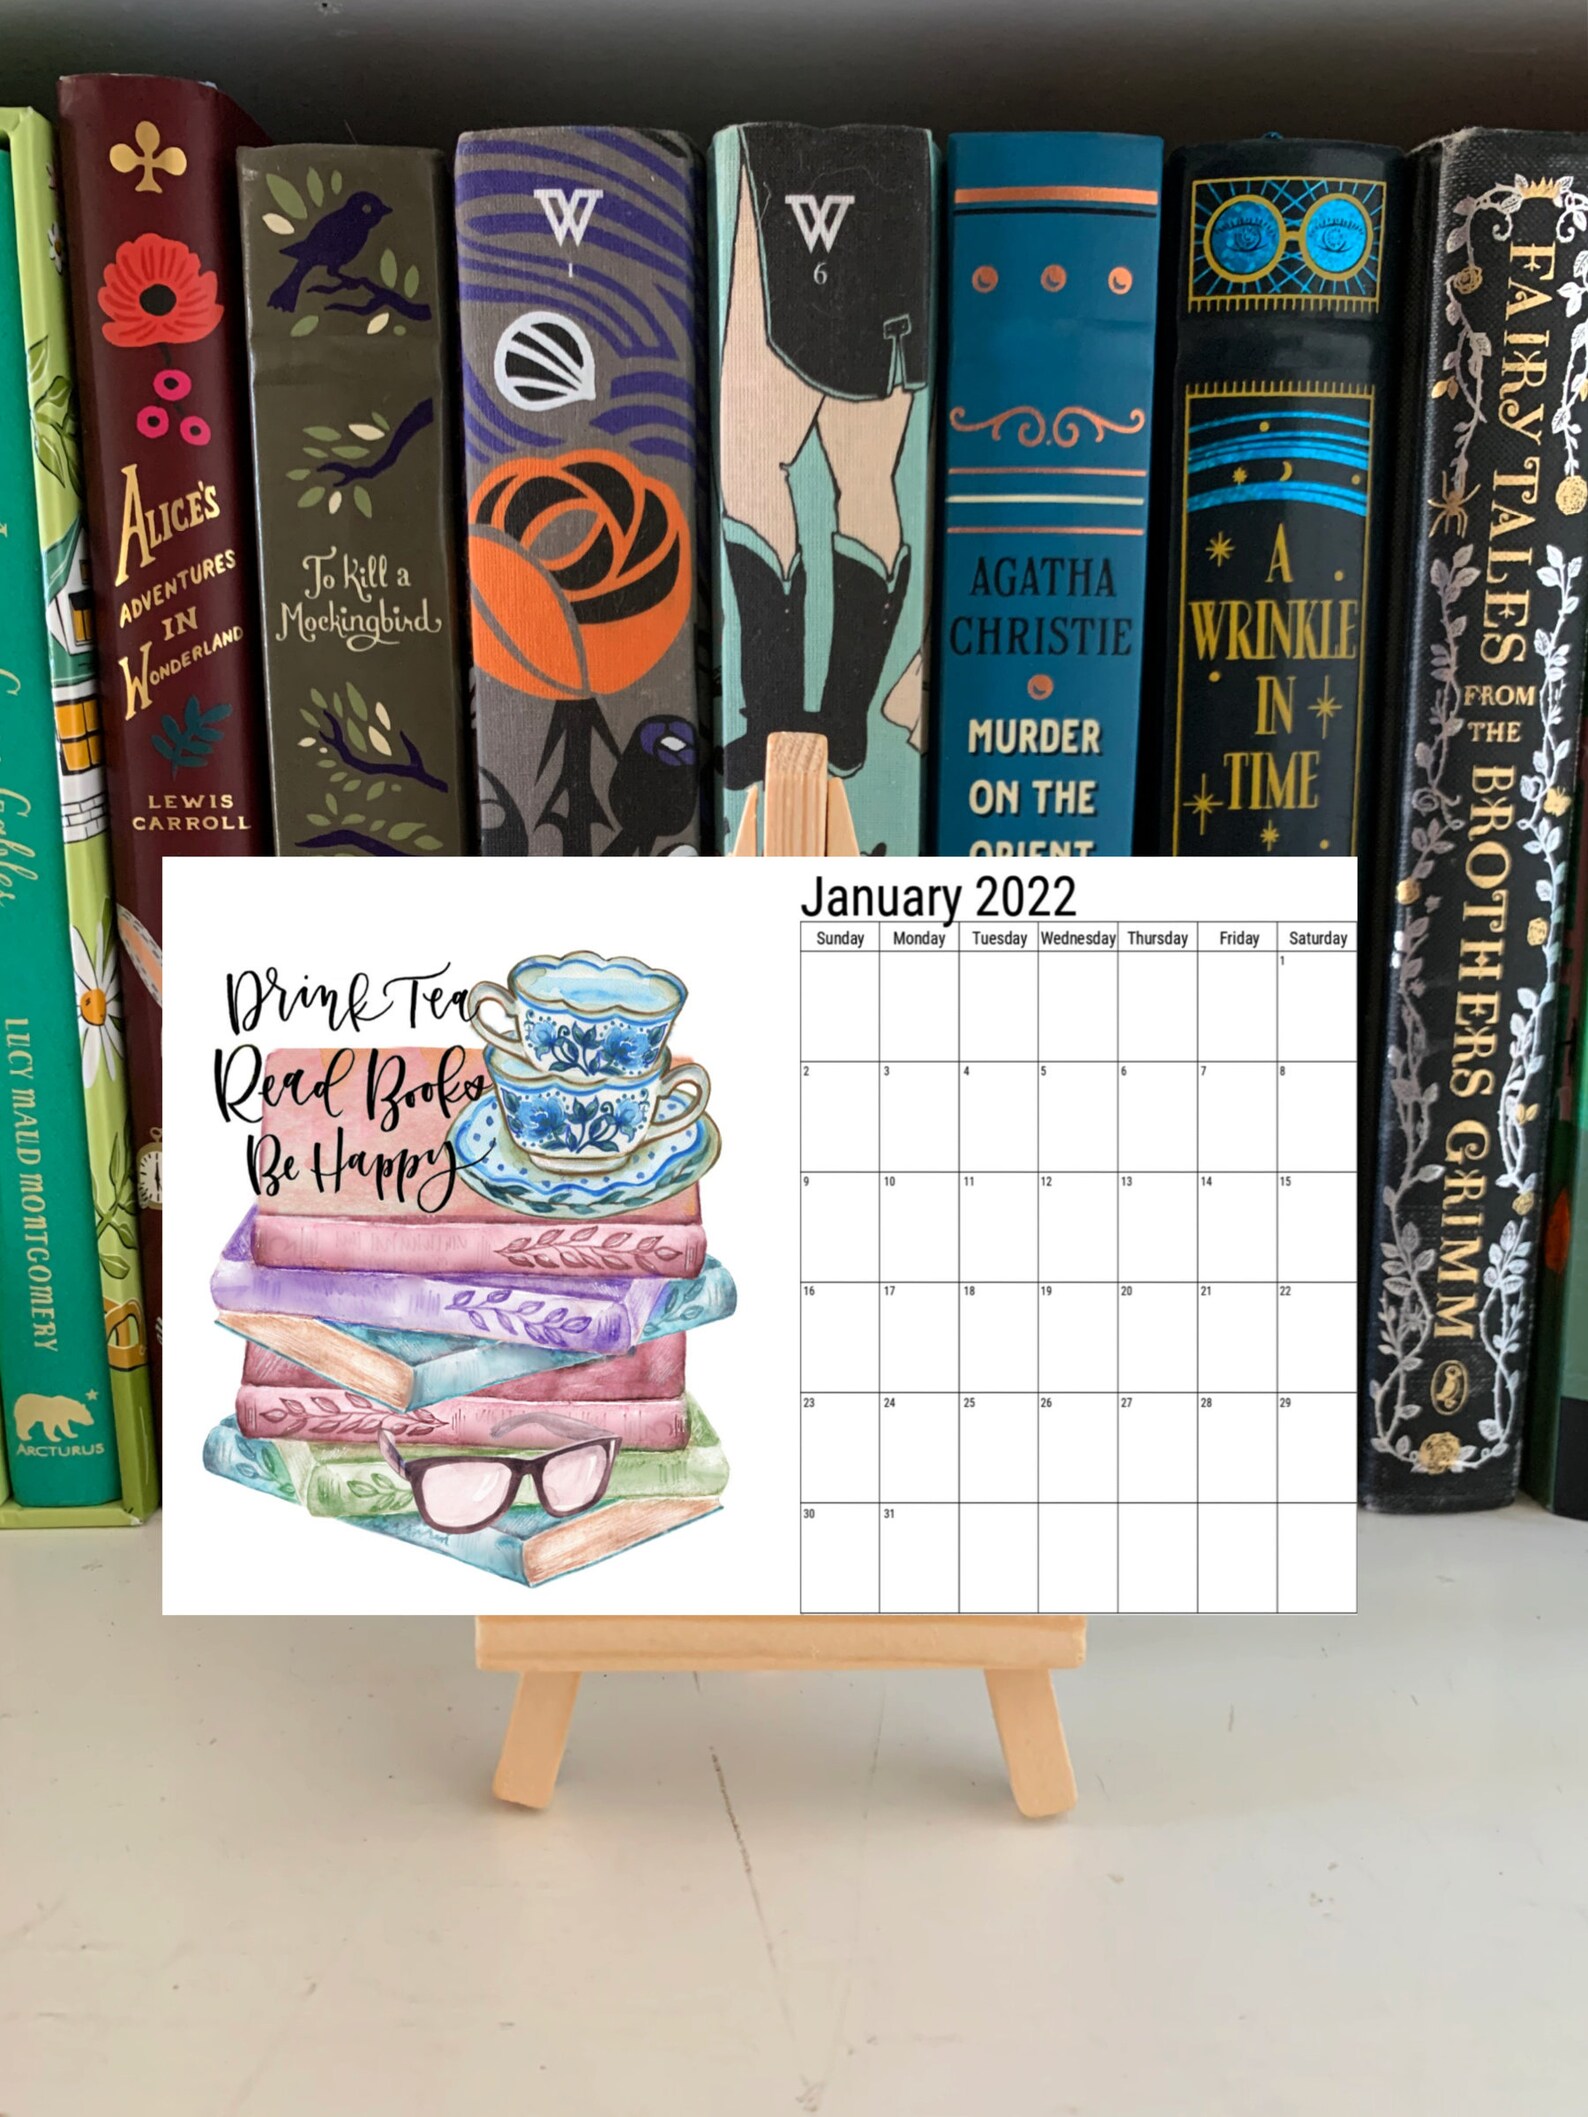 A picture of a small desk calendar featuring bookish quotes, on a small wooden stand.